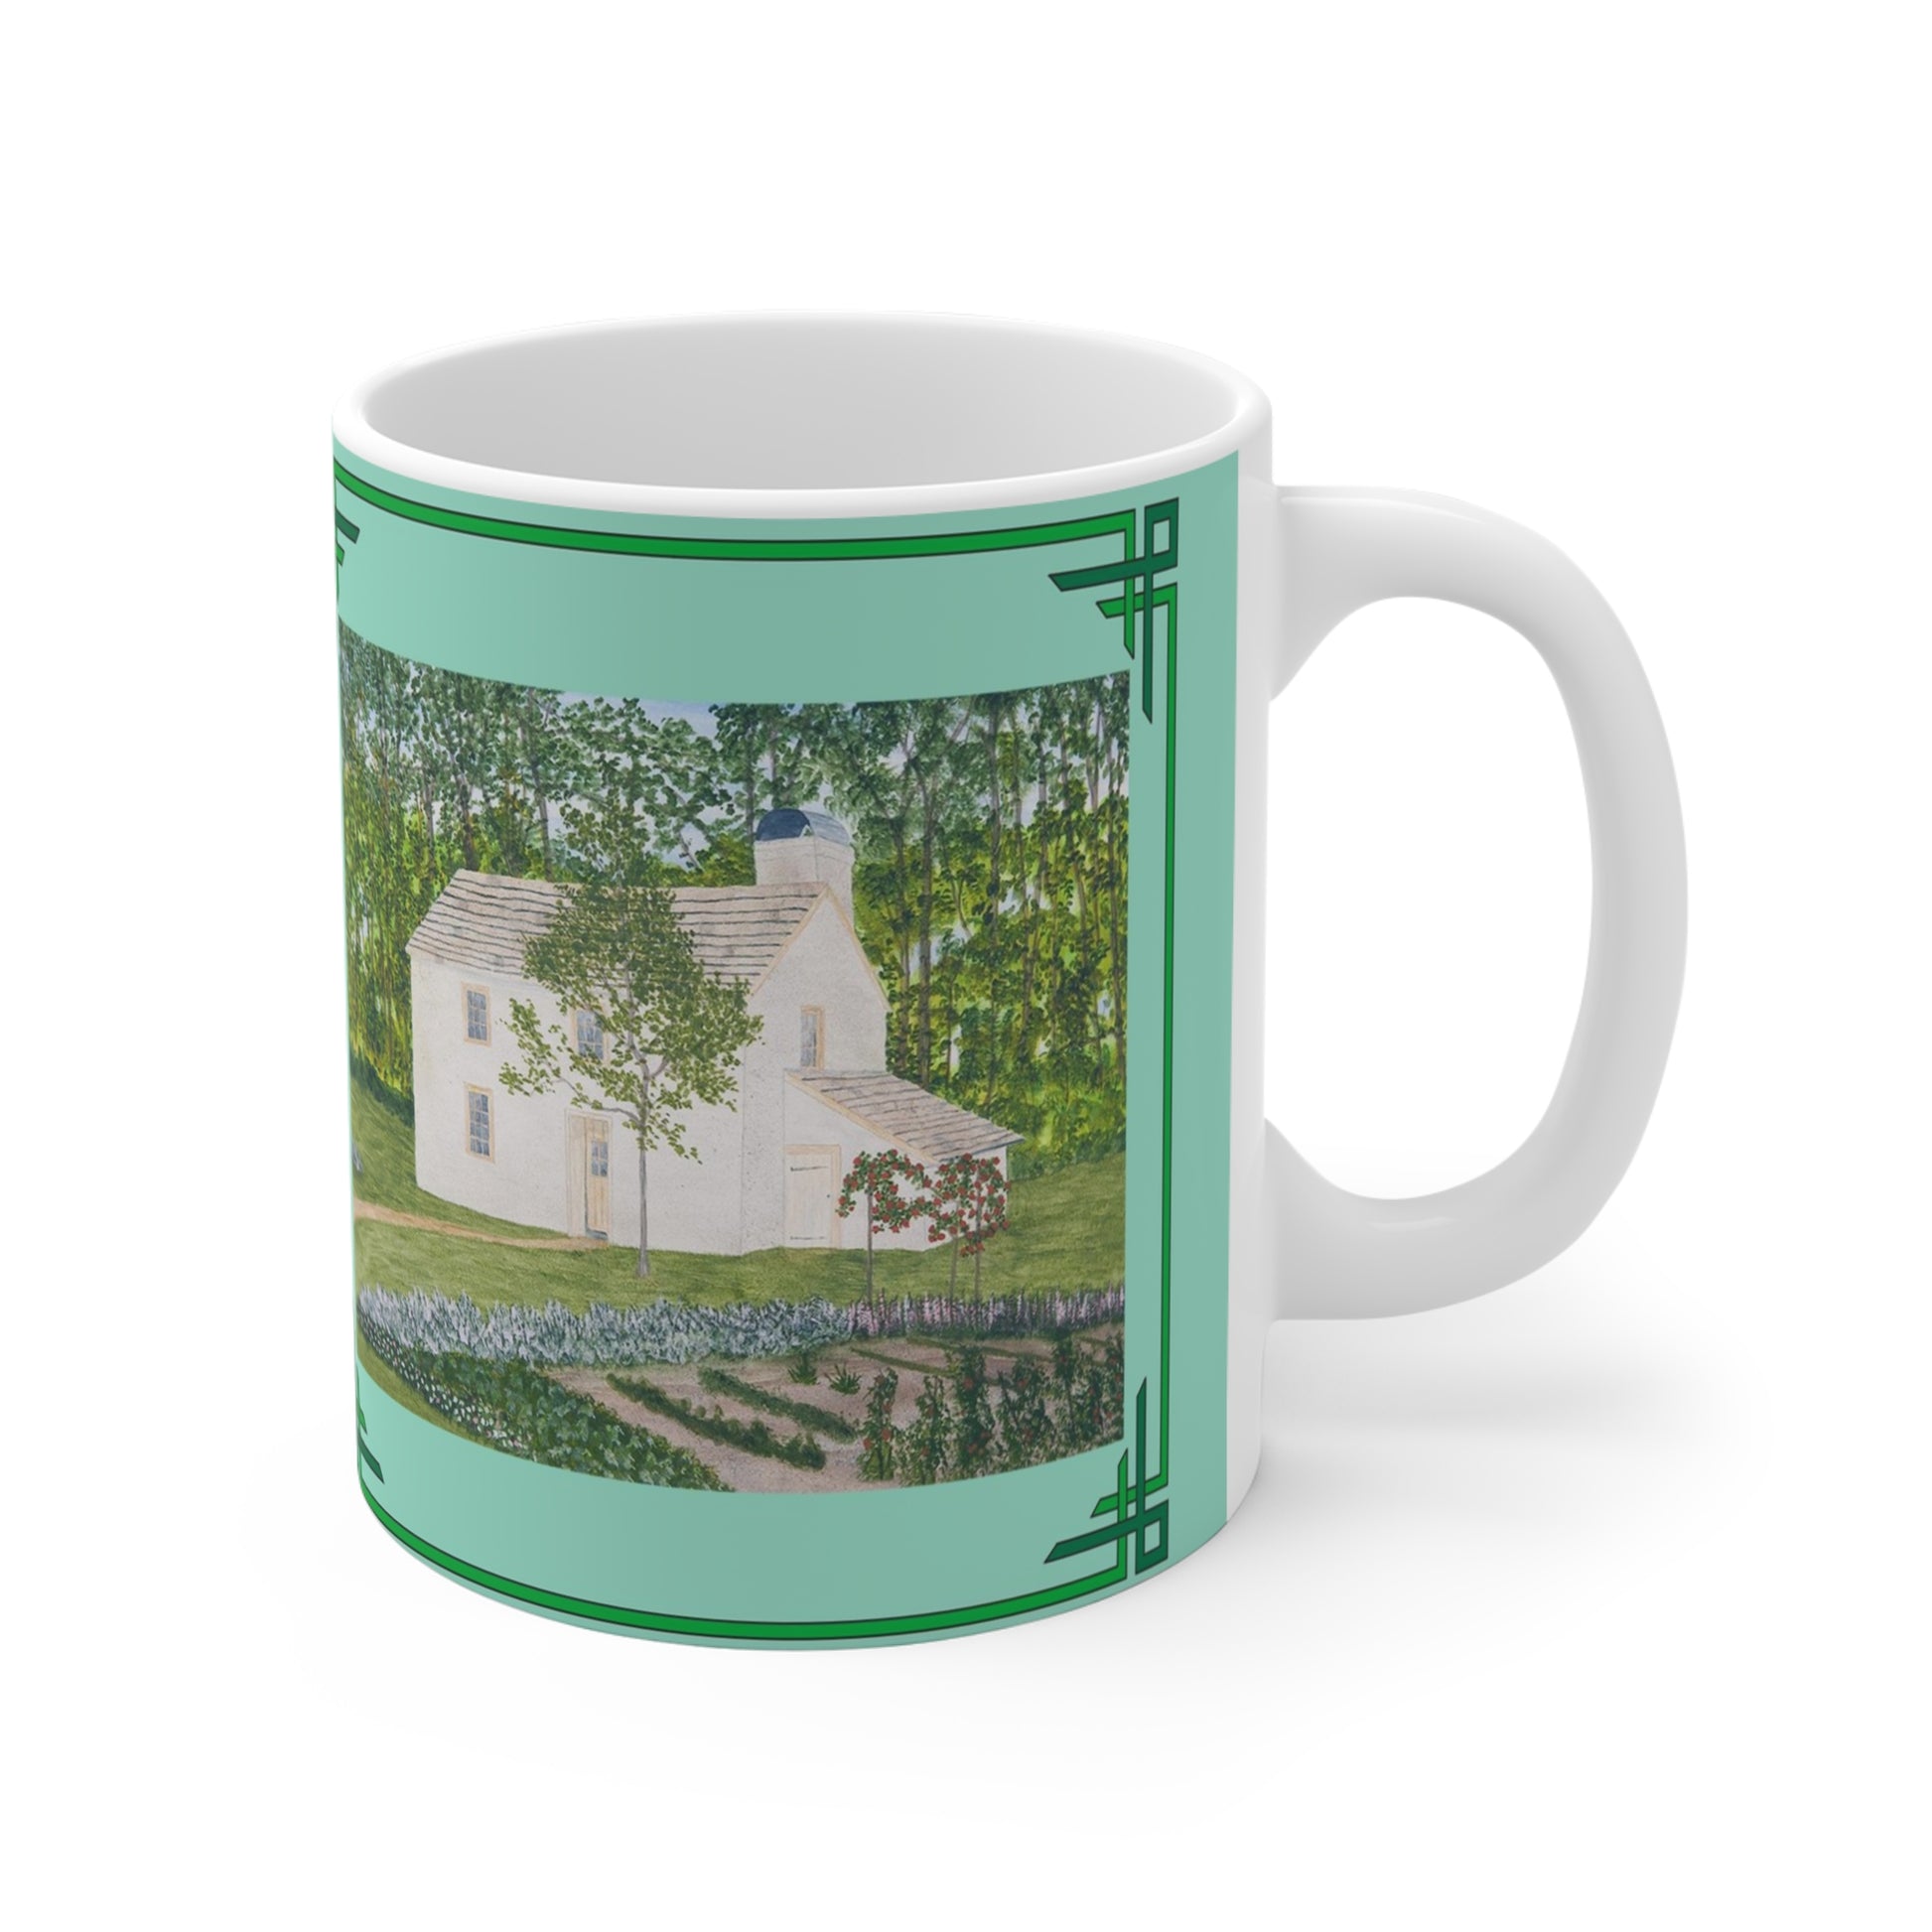 The Country Garden 11 oz. Mug features a lovely country landscape reproduction of a watercolor painting by artist Lee M. Buchanan. Enjoy your favorite beverages in this charming country mug!